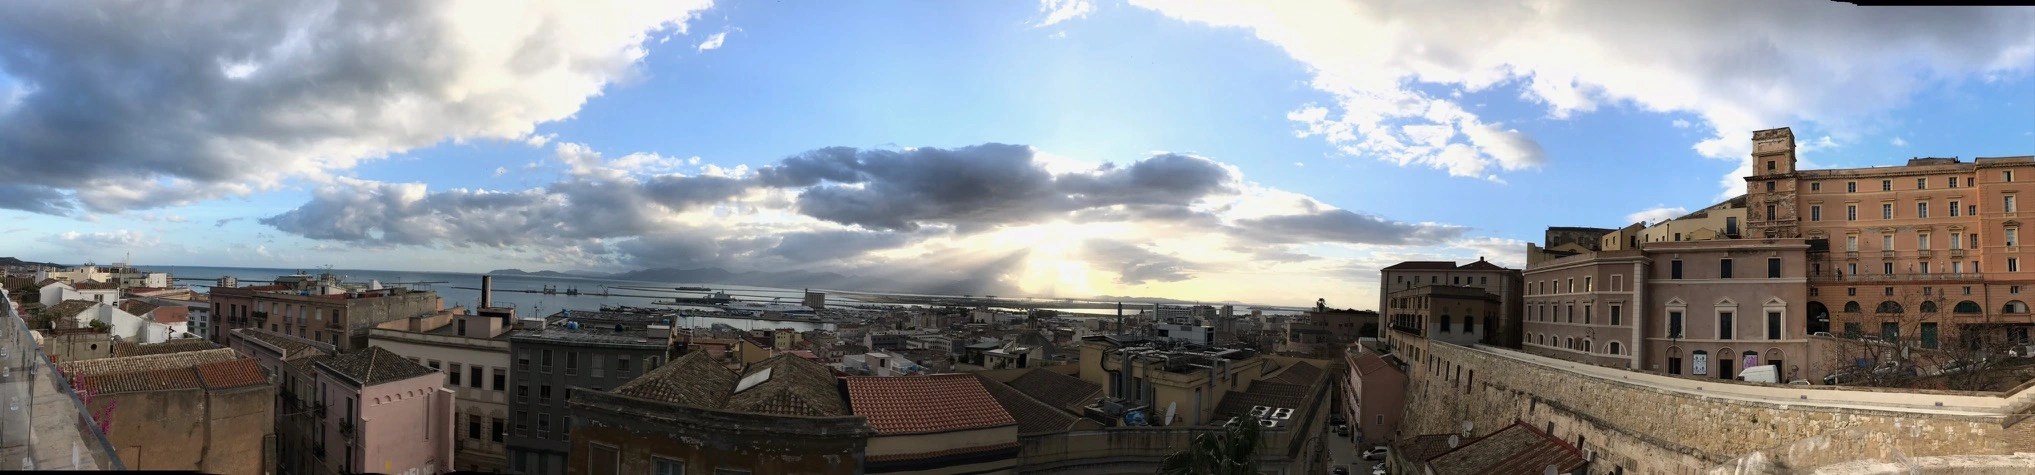 Vaccine in a bottle banner image -Panoramic photo of the coastal town of Cagliari